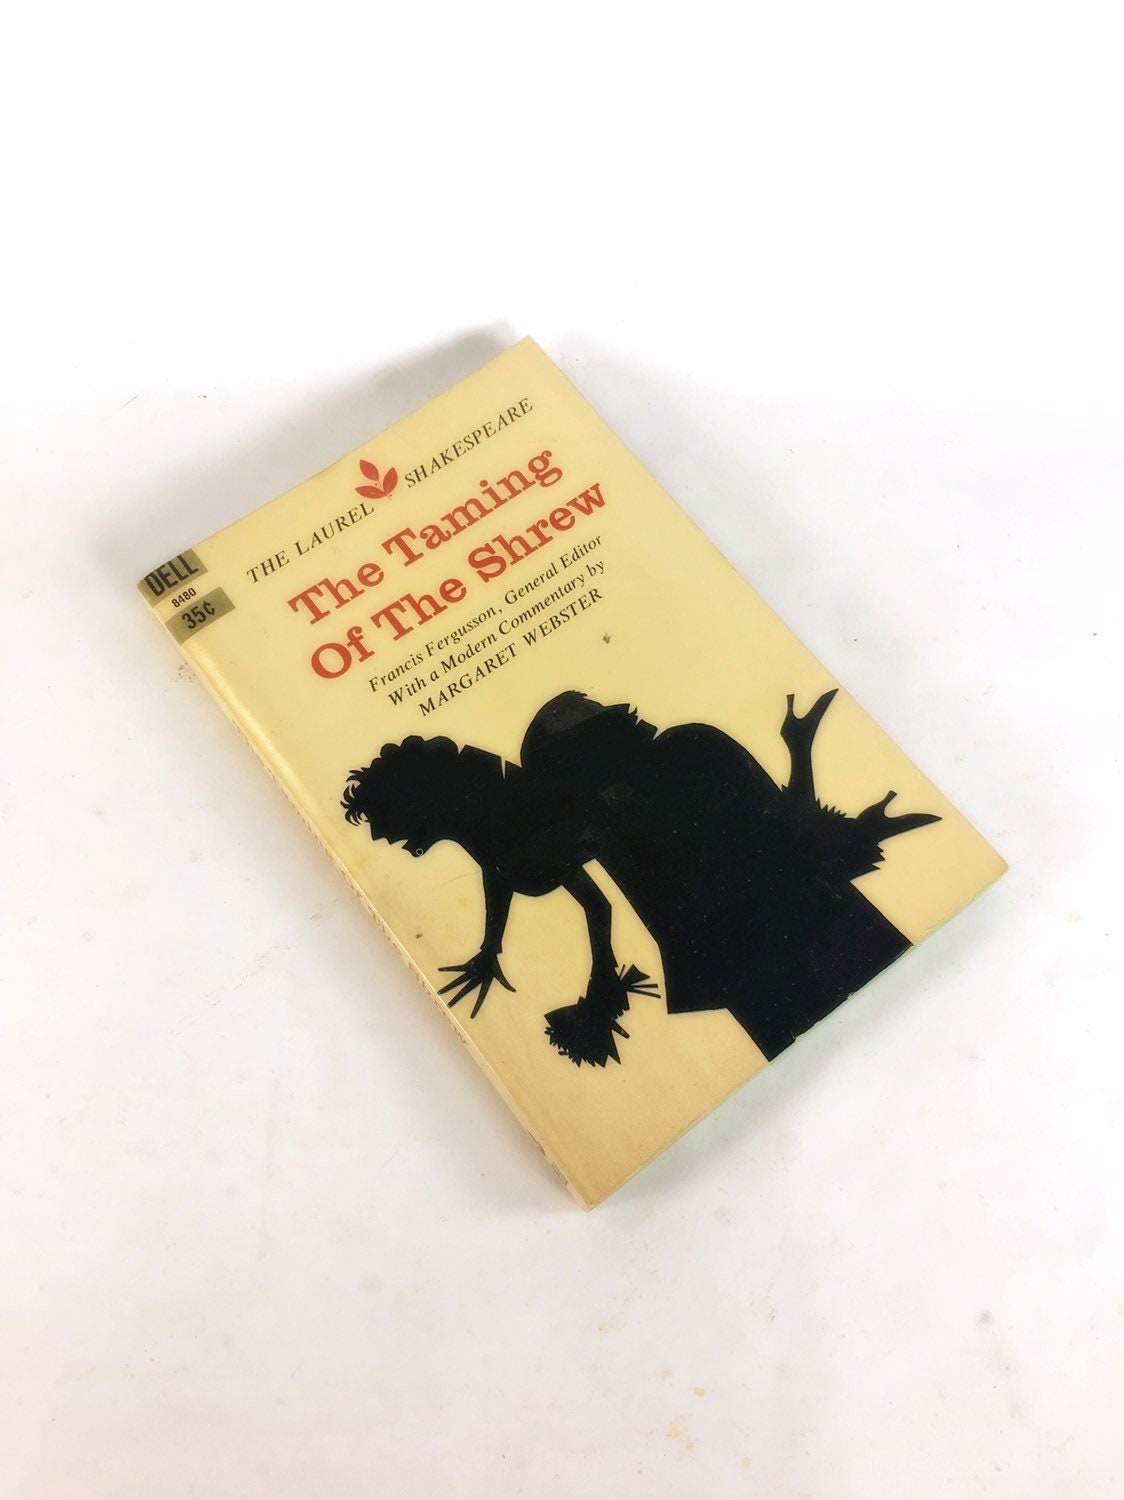 Taming of the Shrew by William Shakespeare. Vintage Dell paperback book circa 1962. Laurel home decor gift. Christmas Chanukah